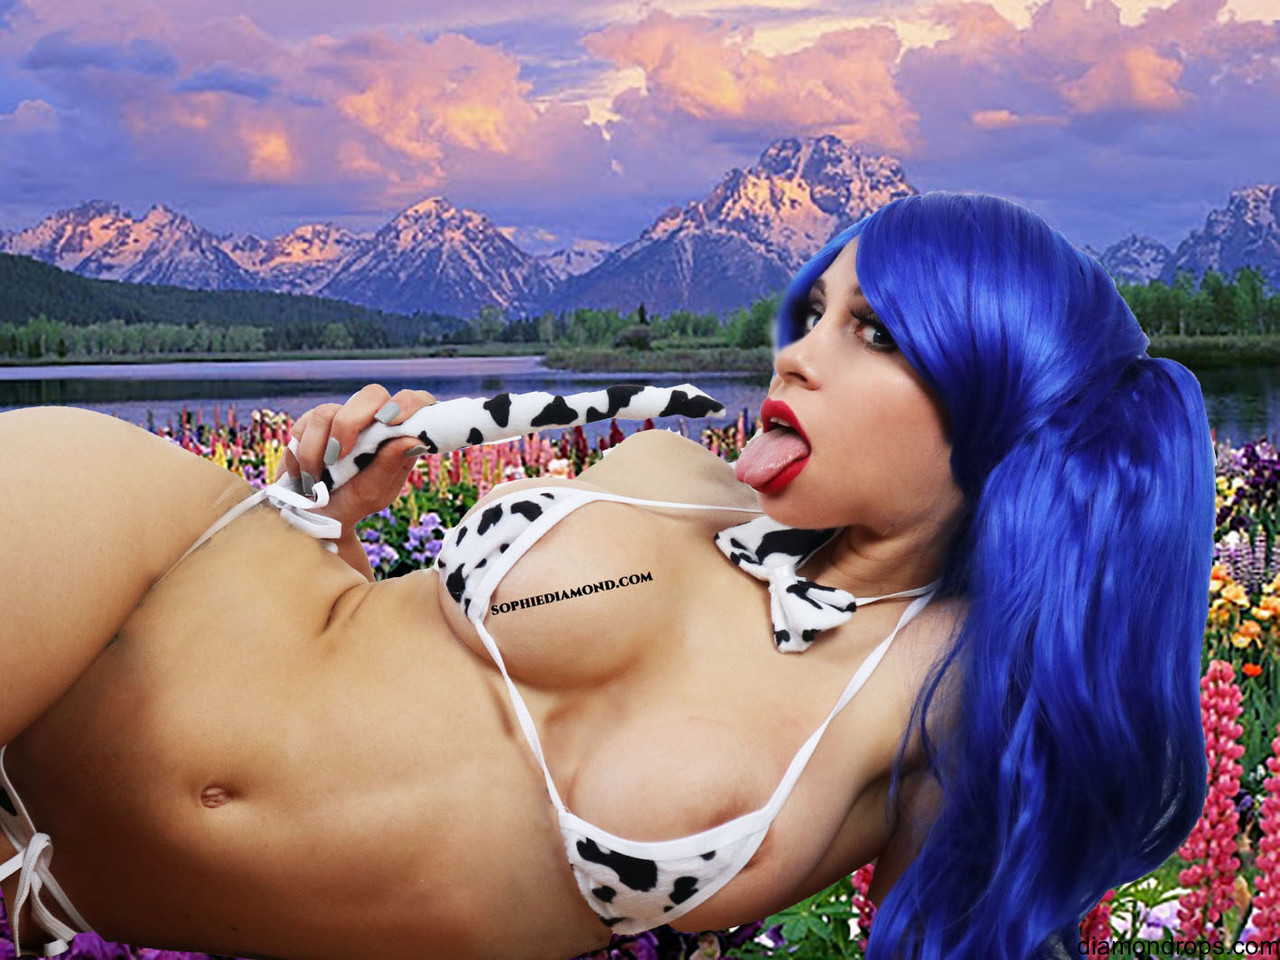 Blue Haired Babe Sophie Diamond Poses In A Cow Bikini Flaunts Her Big Tits